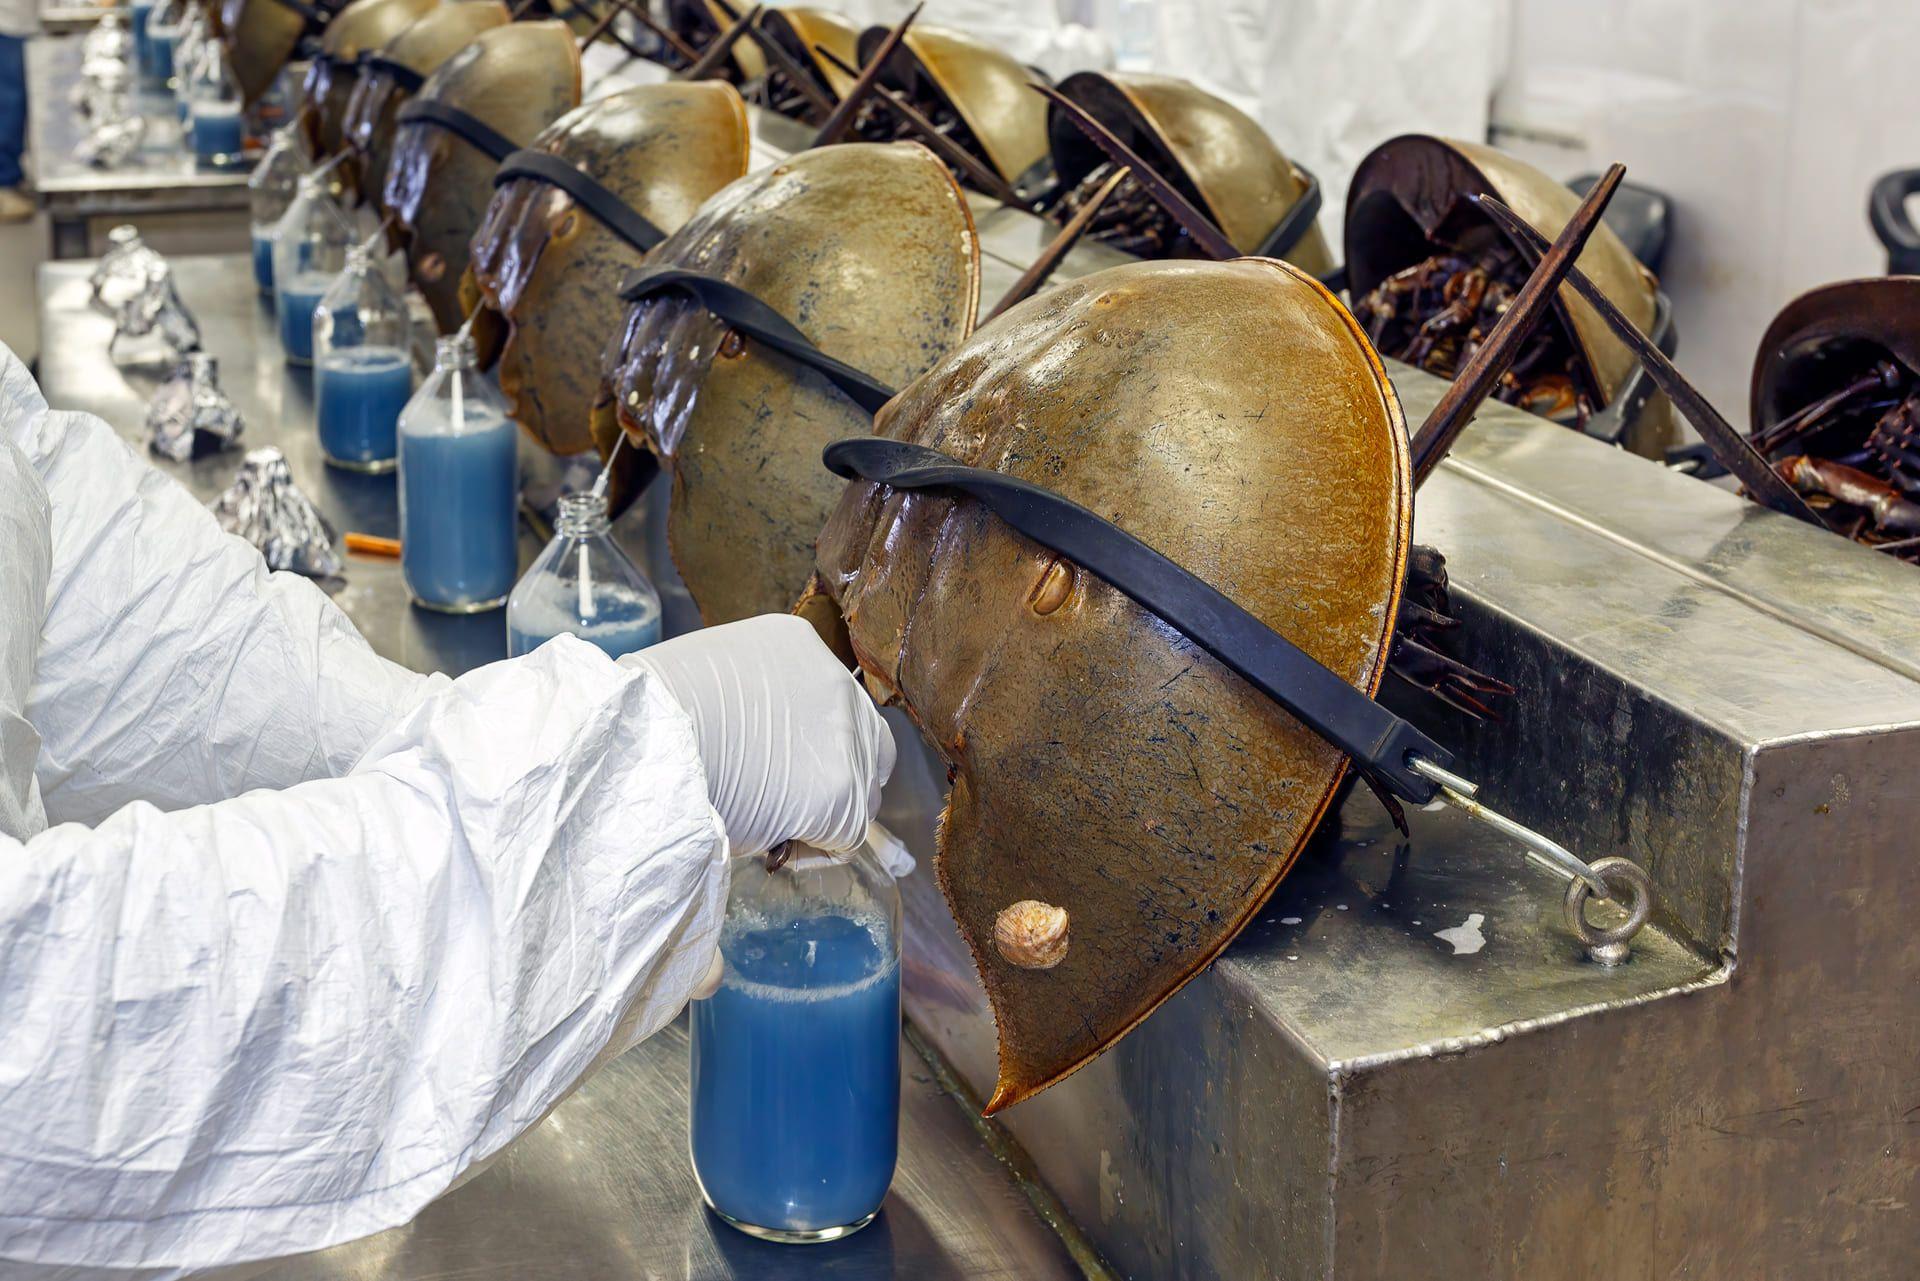 What do we need to know about horseshoe crabs that have saved millions of human lives?